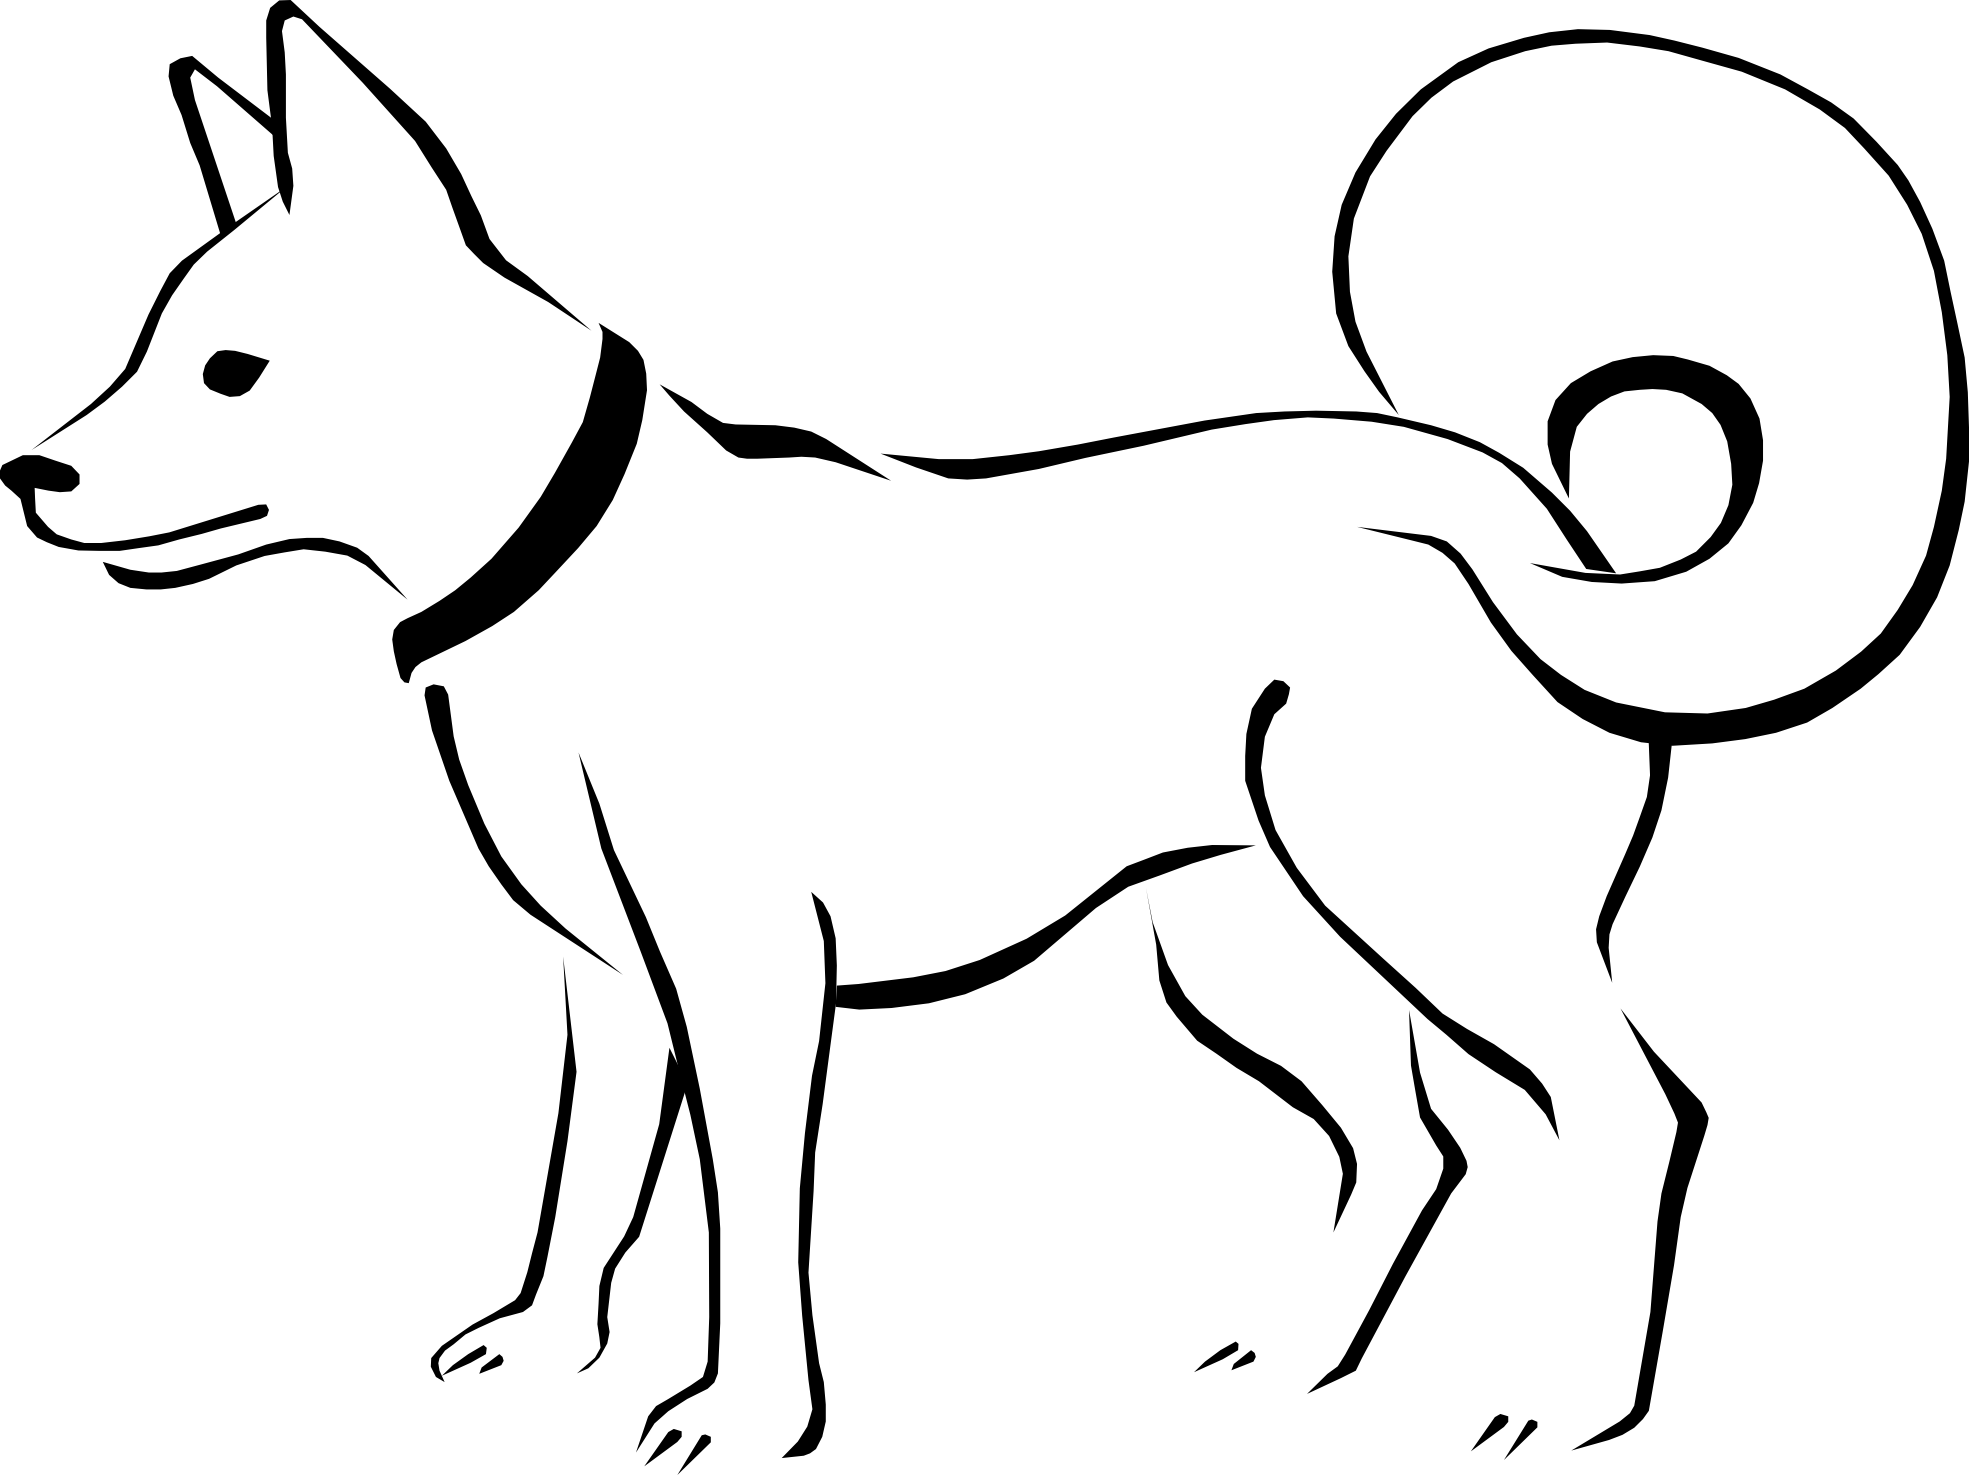 pet animals clipart black and white